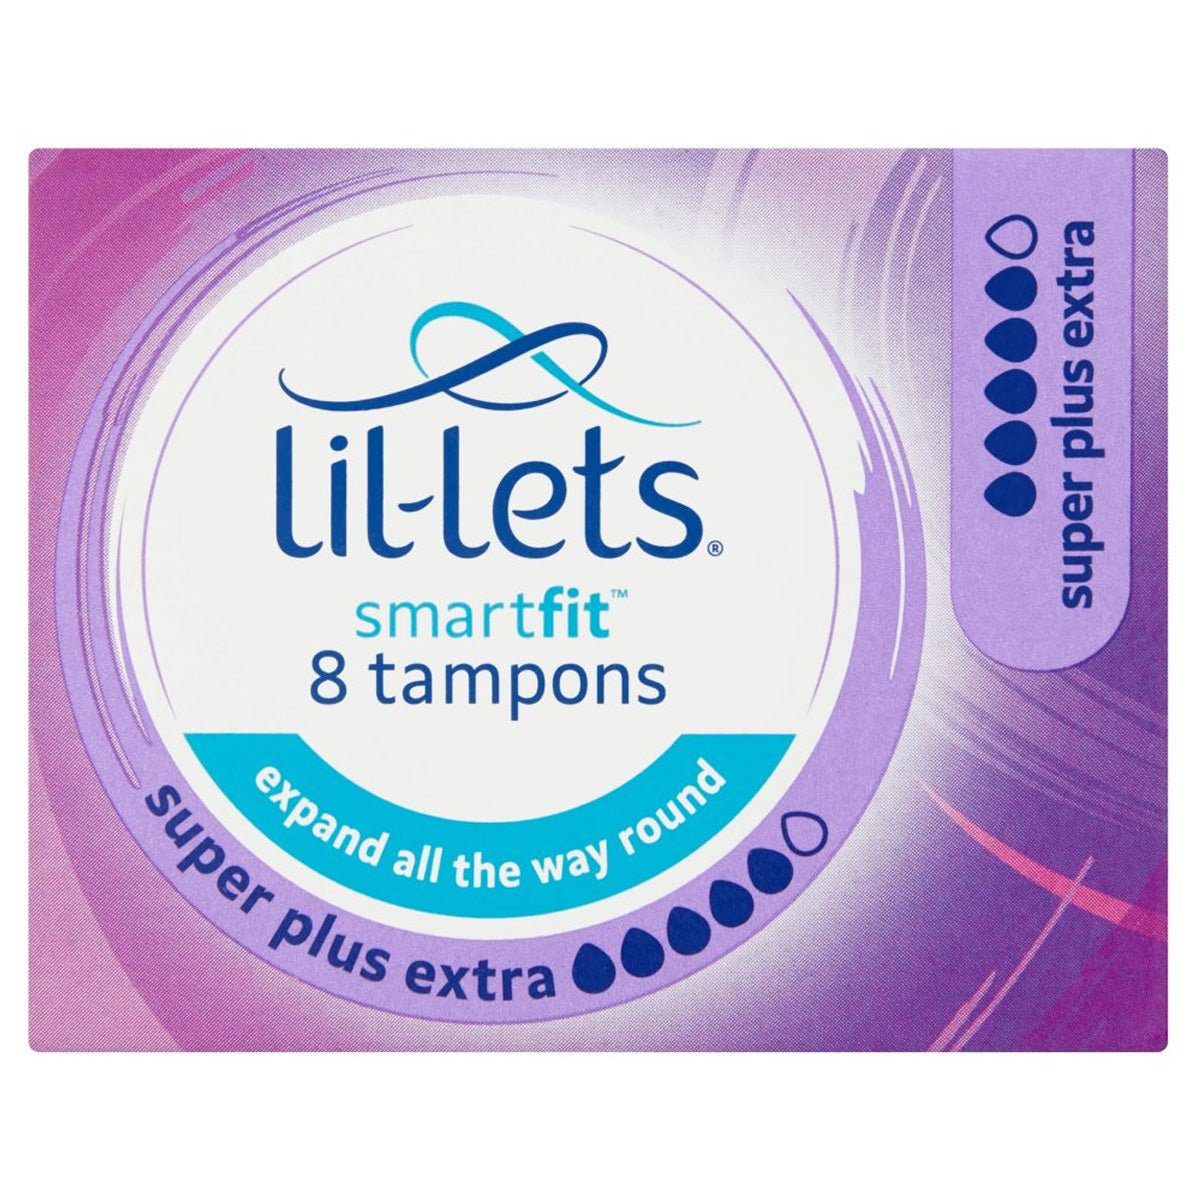 A box of Lil-Lets Non-Applicator Super Plus Extra Tampons - 8 Pack.